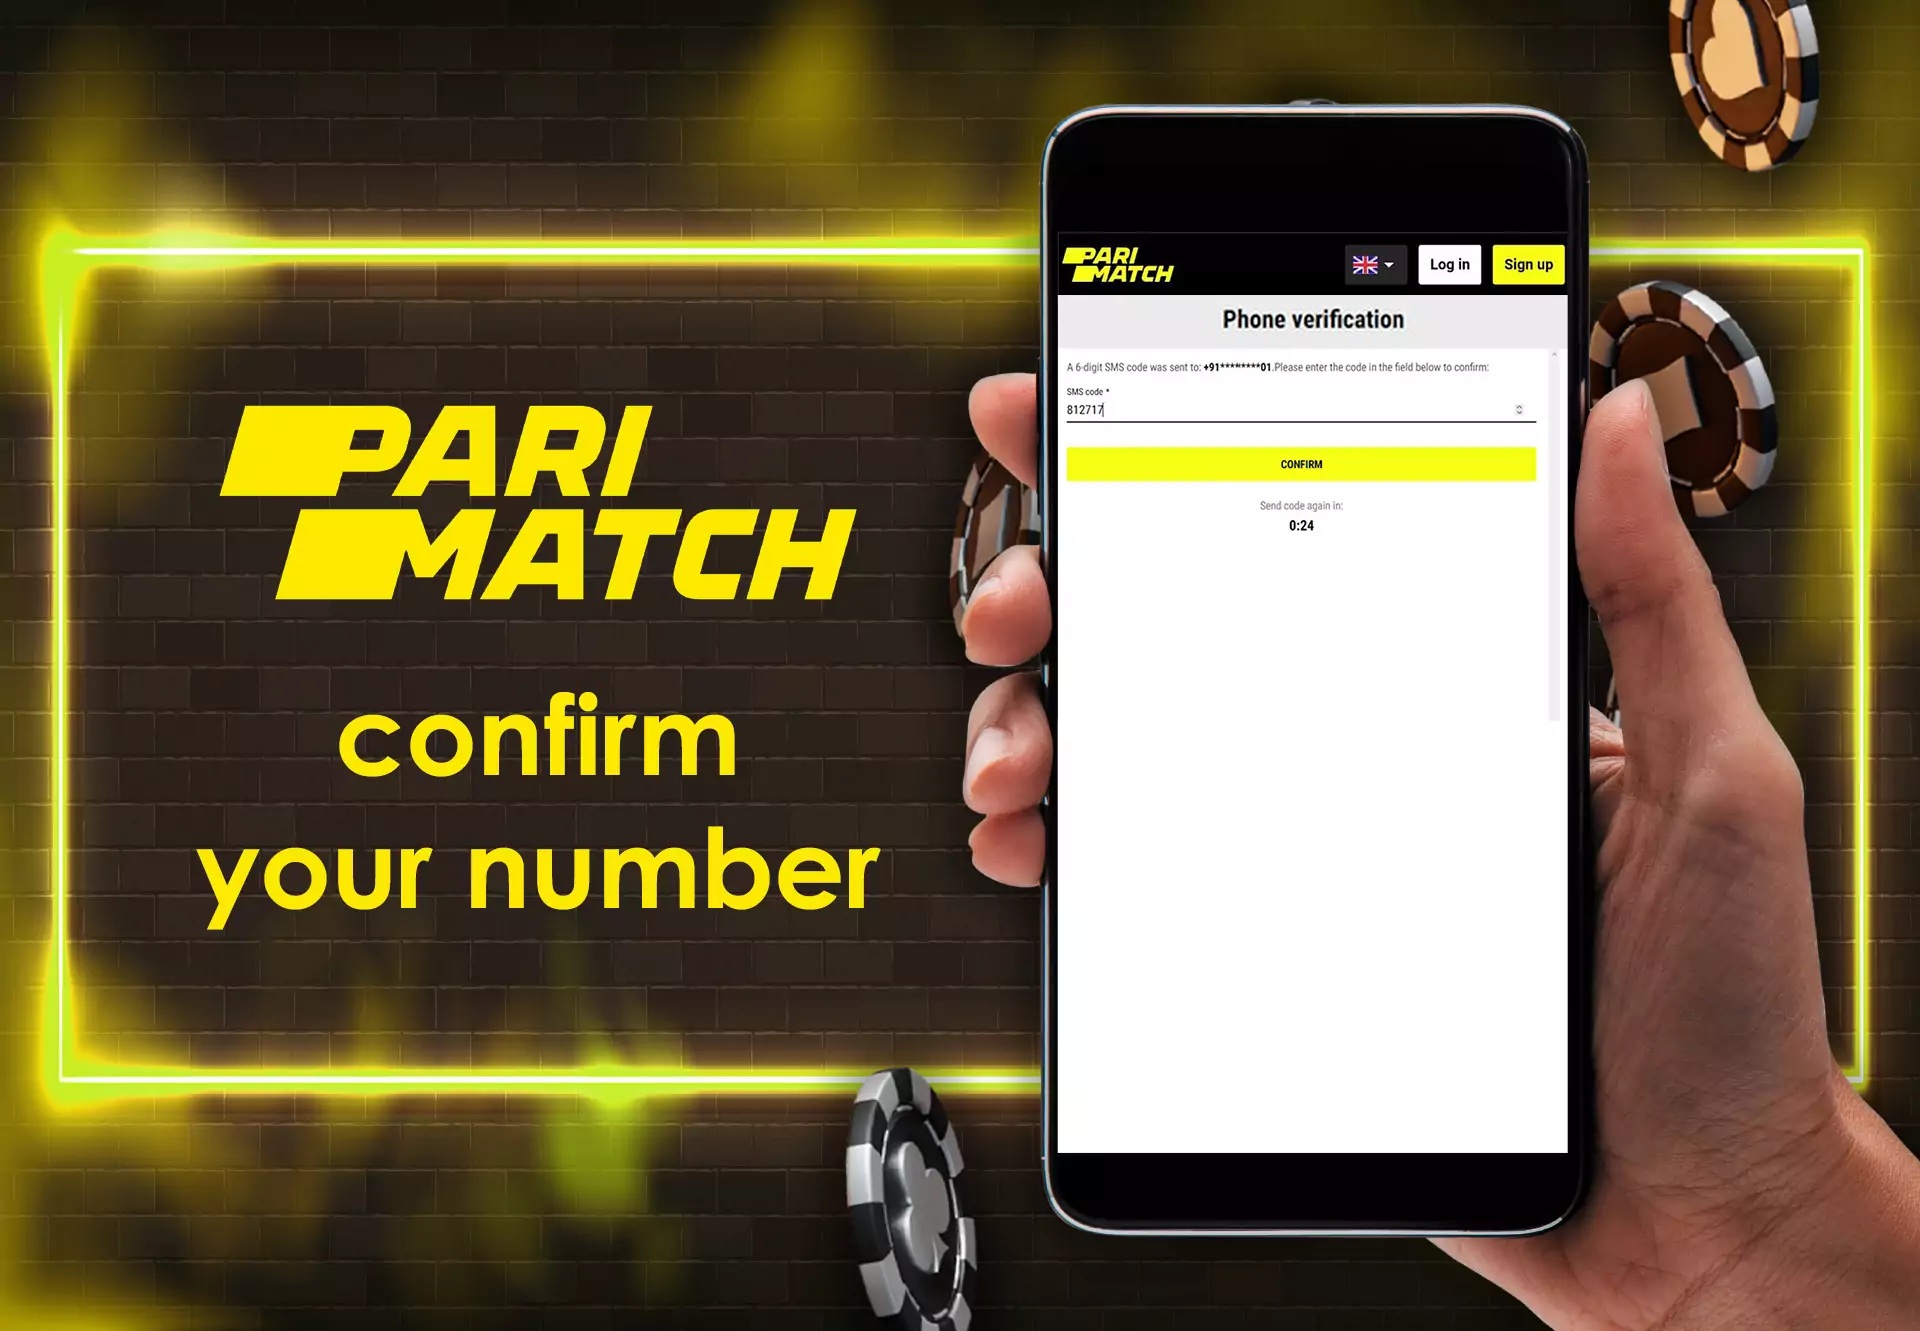 Get the message from the Parimatch and put the code in the next window to complete registration.